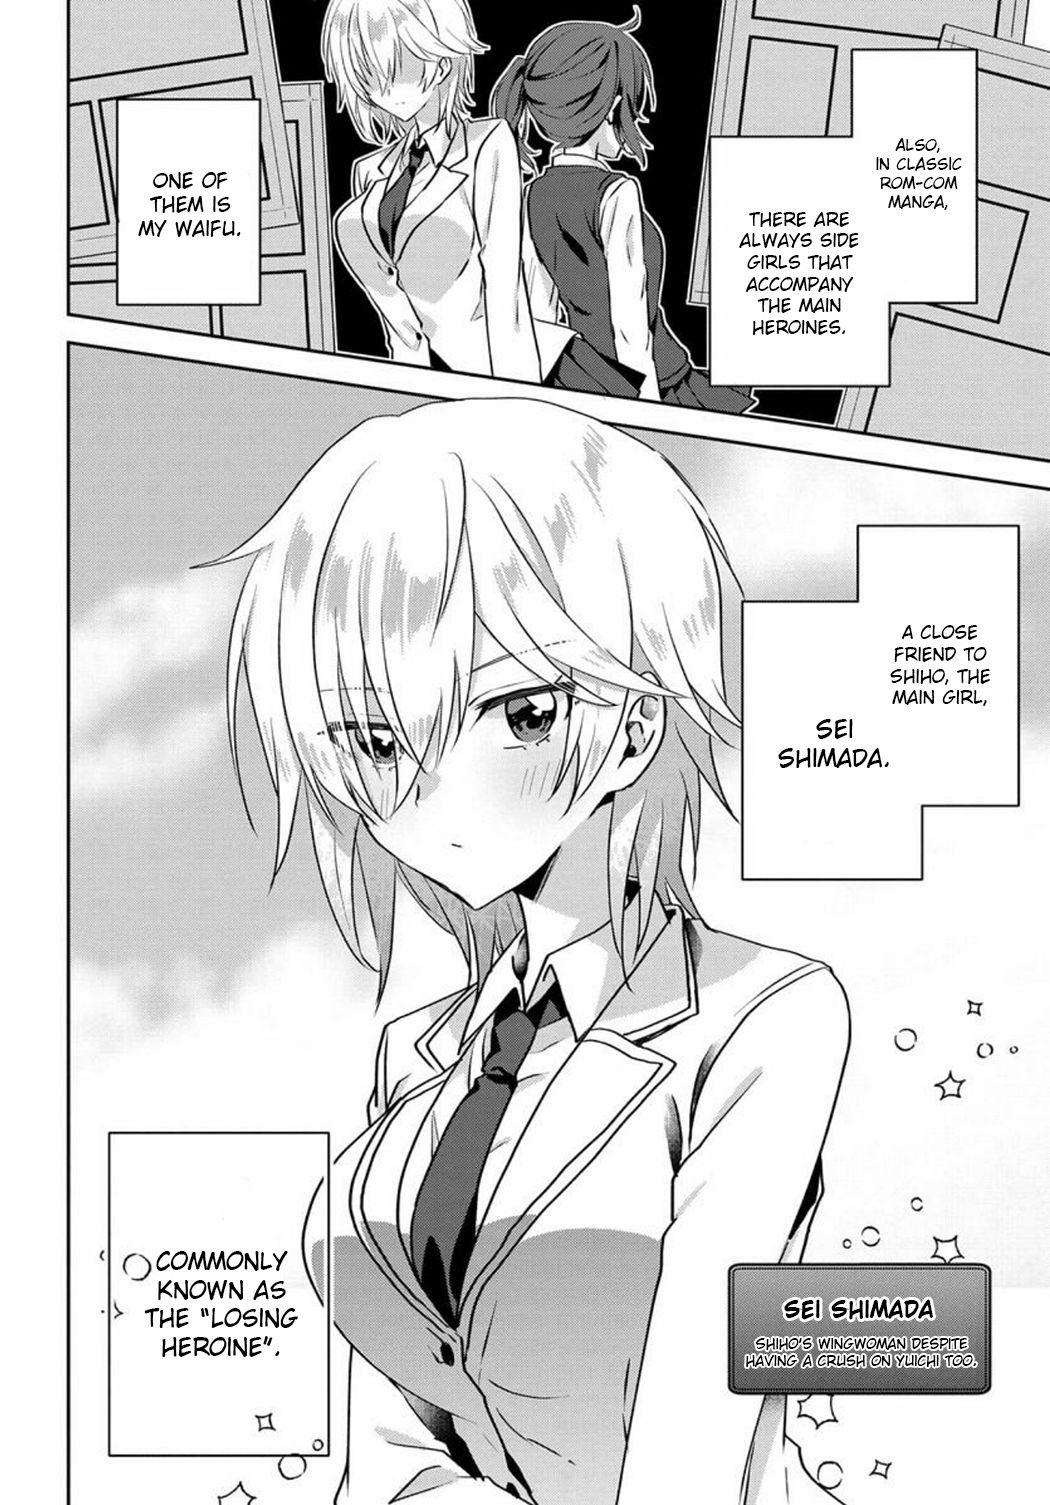 Since I've Entered the World of Romantic Comedy Manga, I'll Do My Best to  Make the Heroine Who Doesn't Stick With the Hero Happy. - Novel Updates